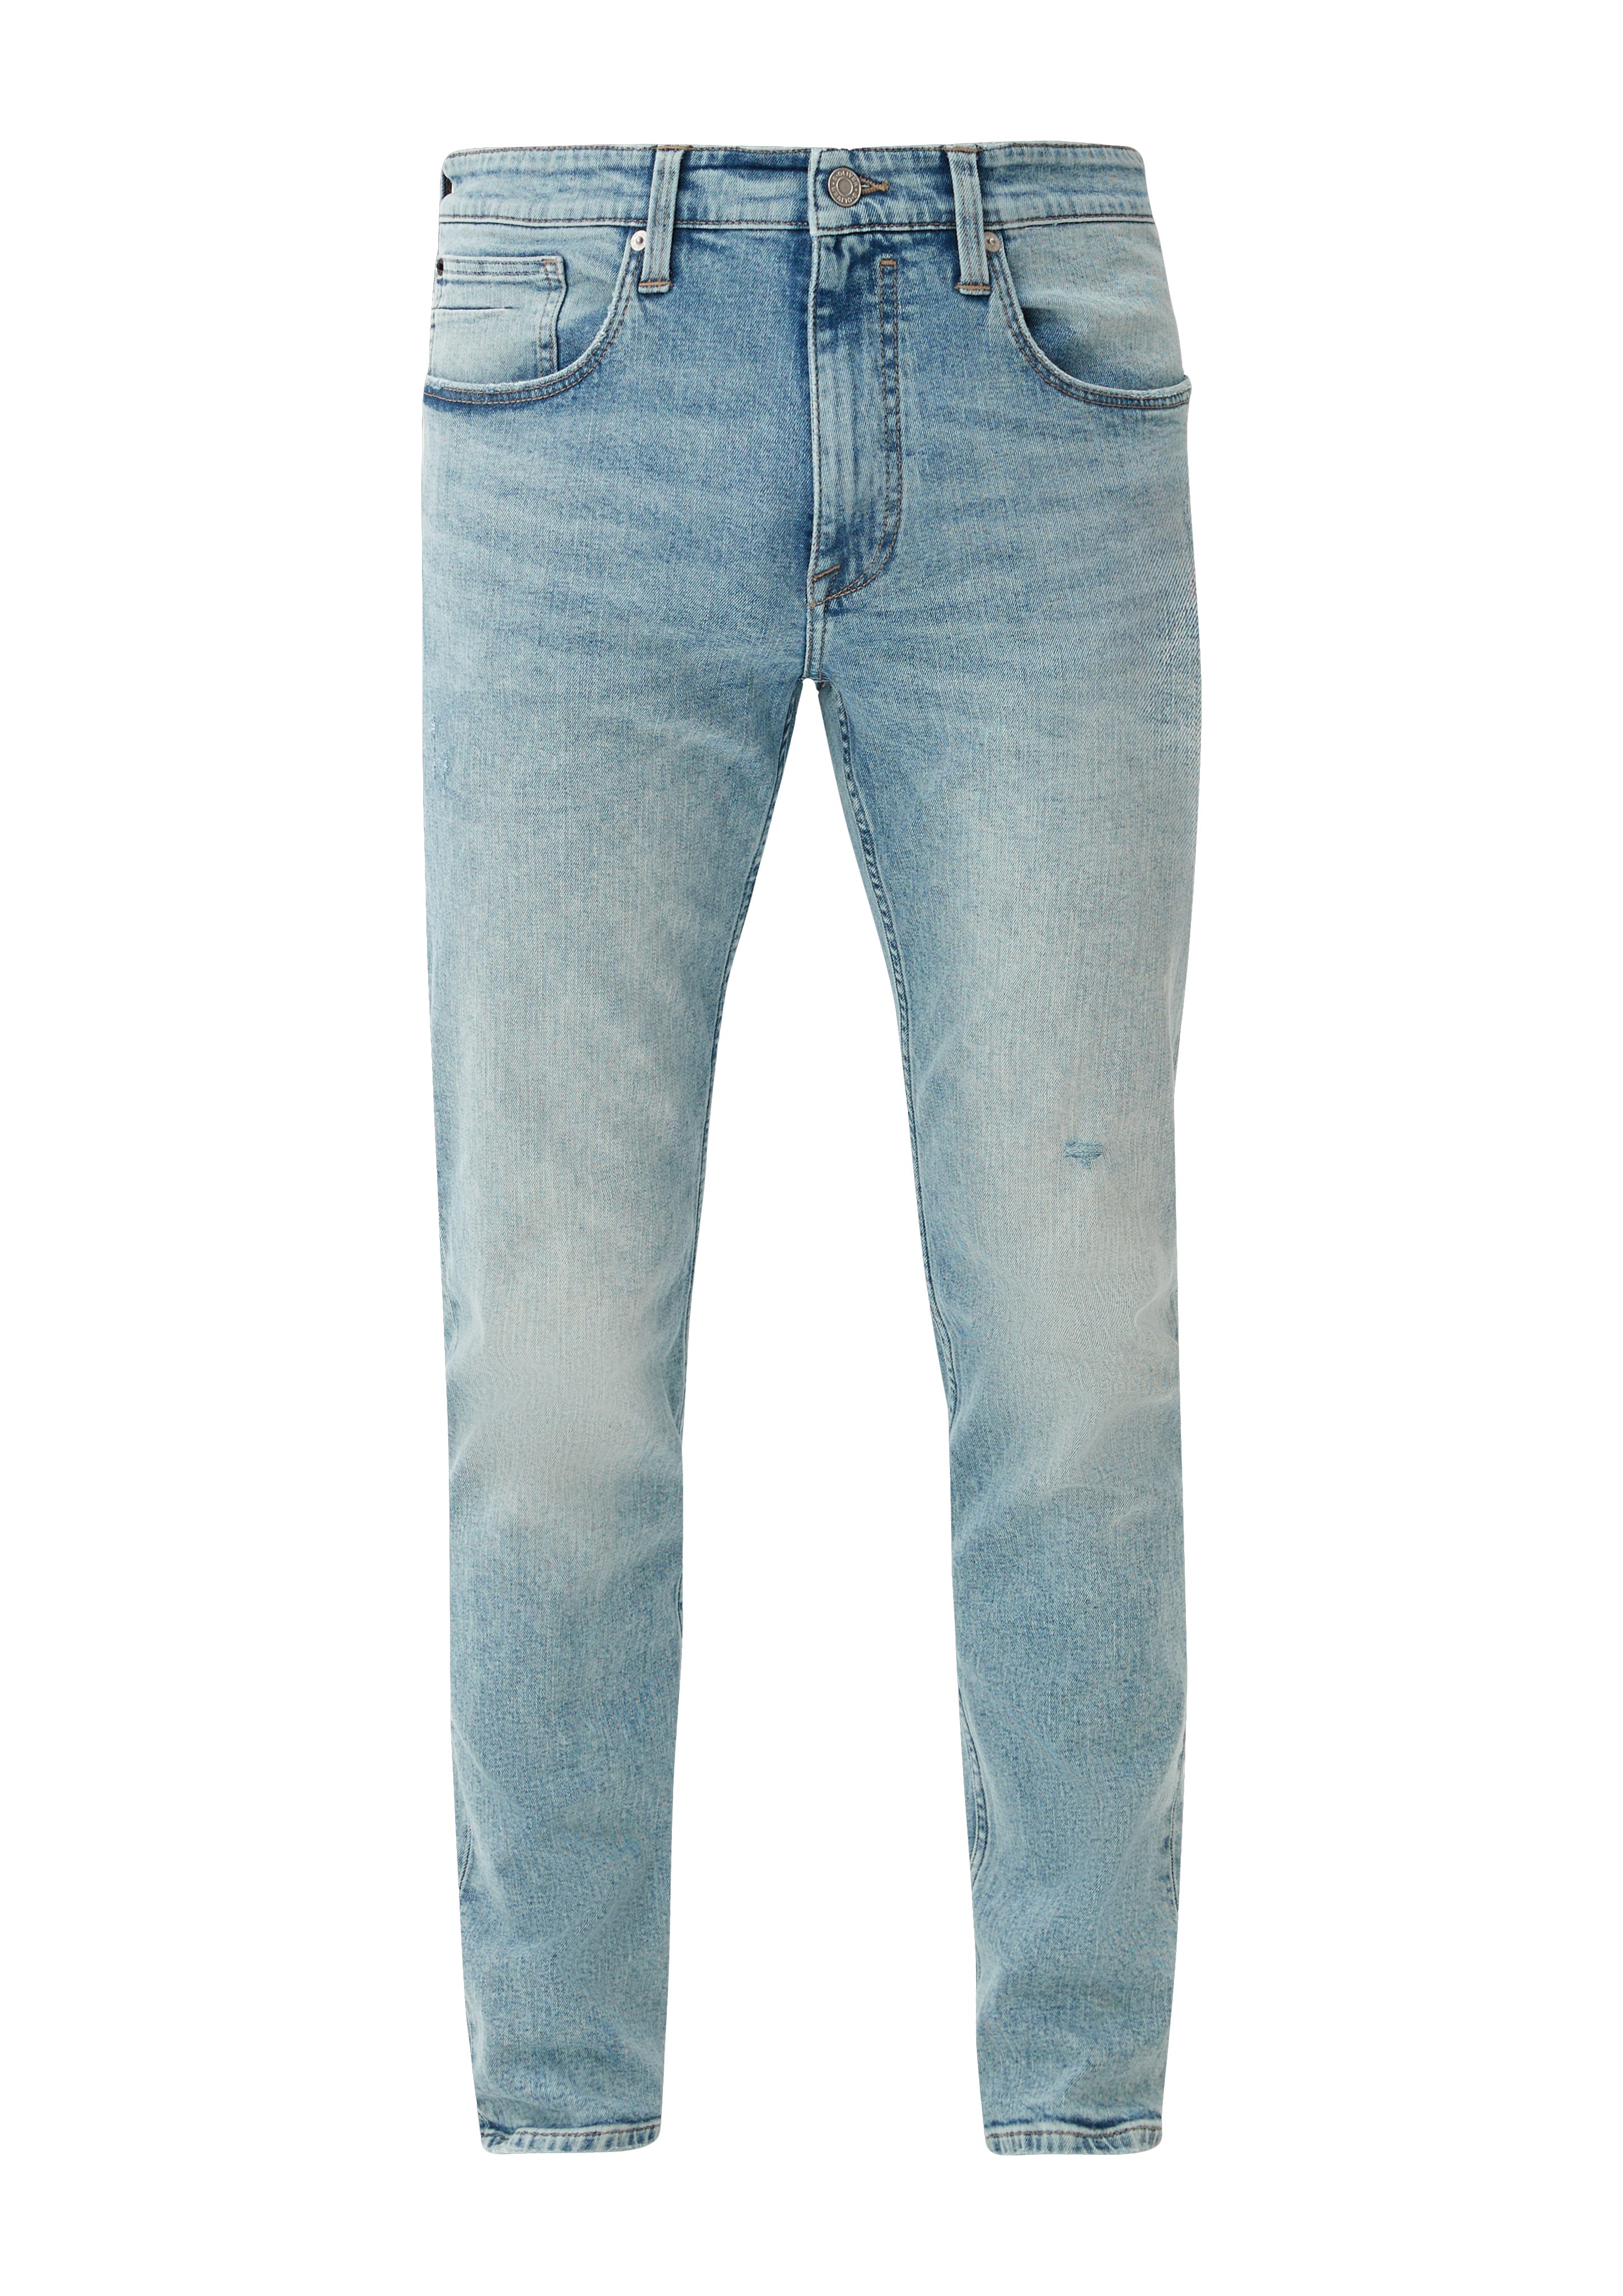 Jeans s.Oliver / Stoffhose Leg Rise Waschung Fit Nelio Slim Slim Mid / /